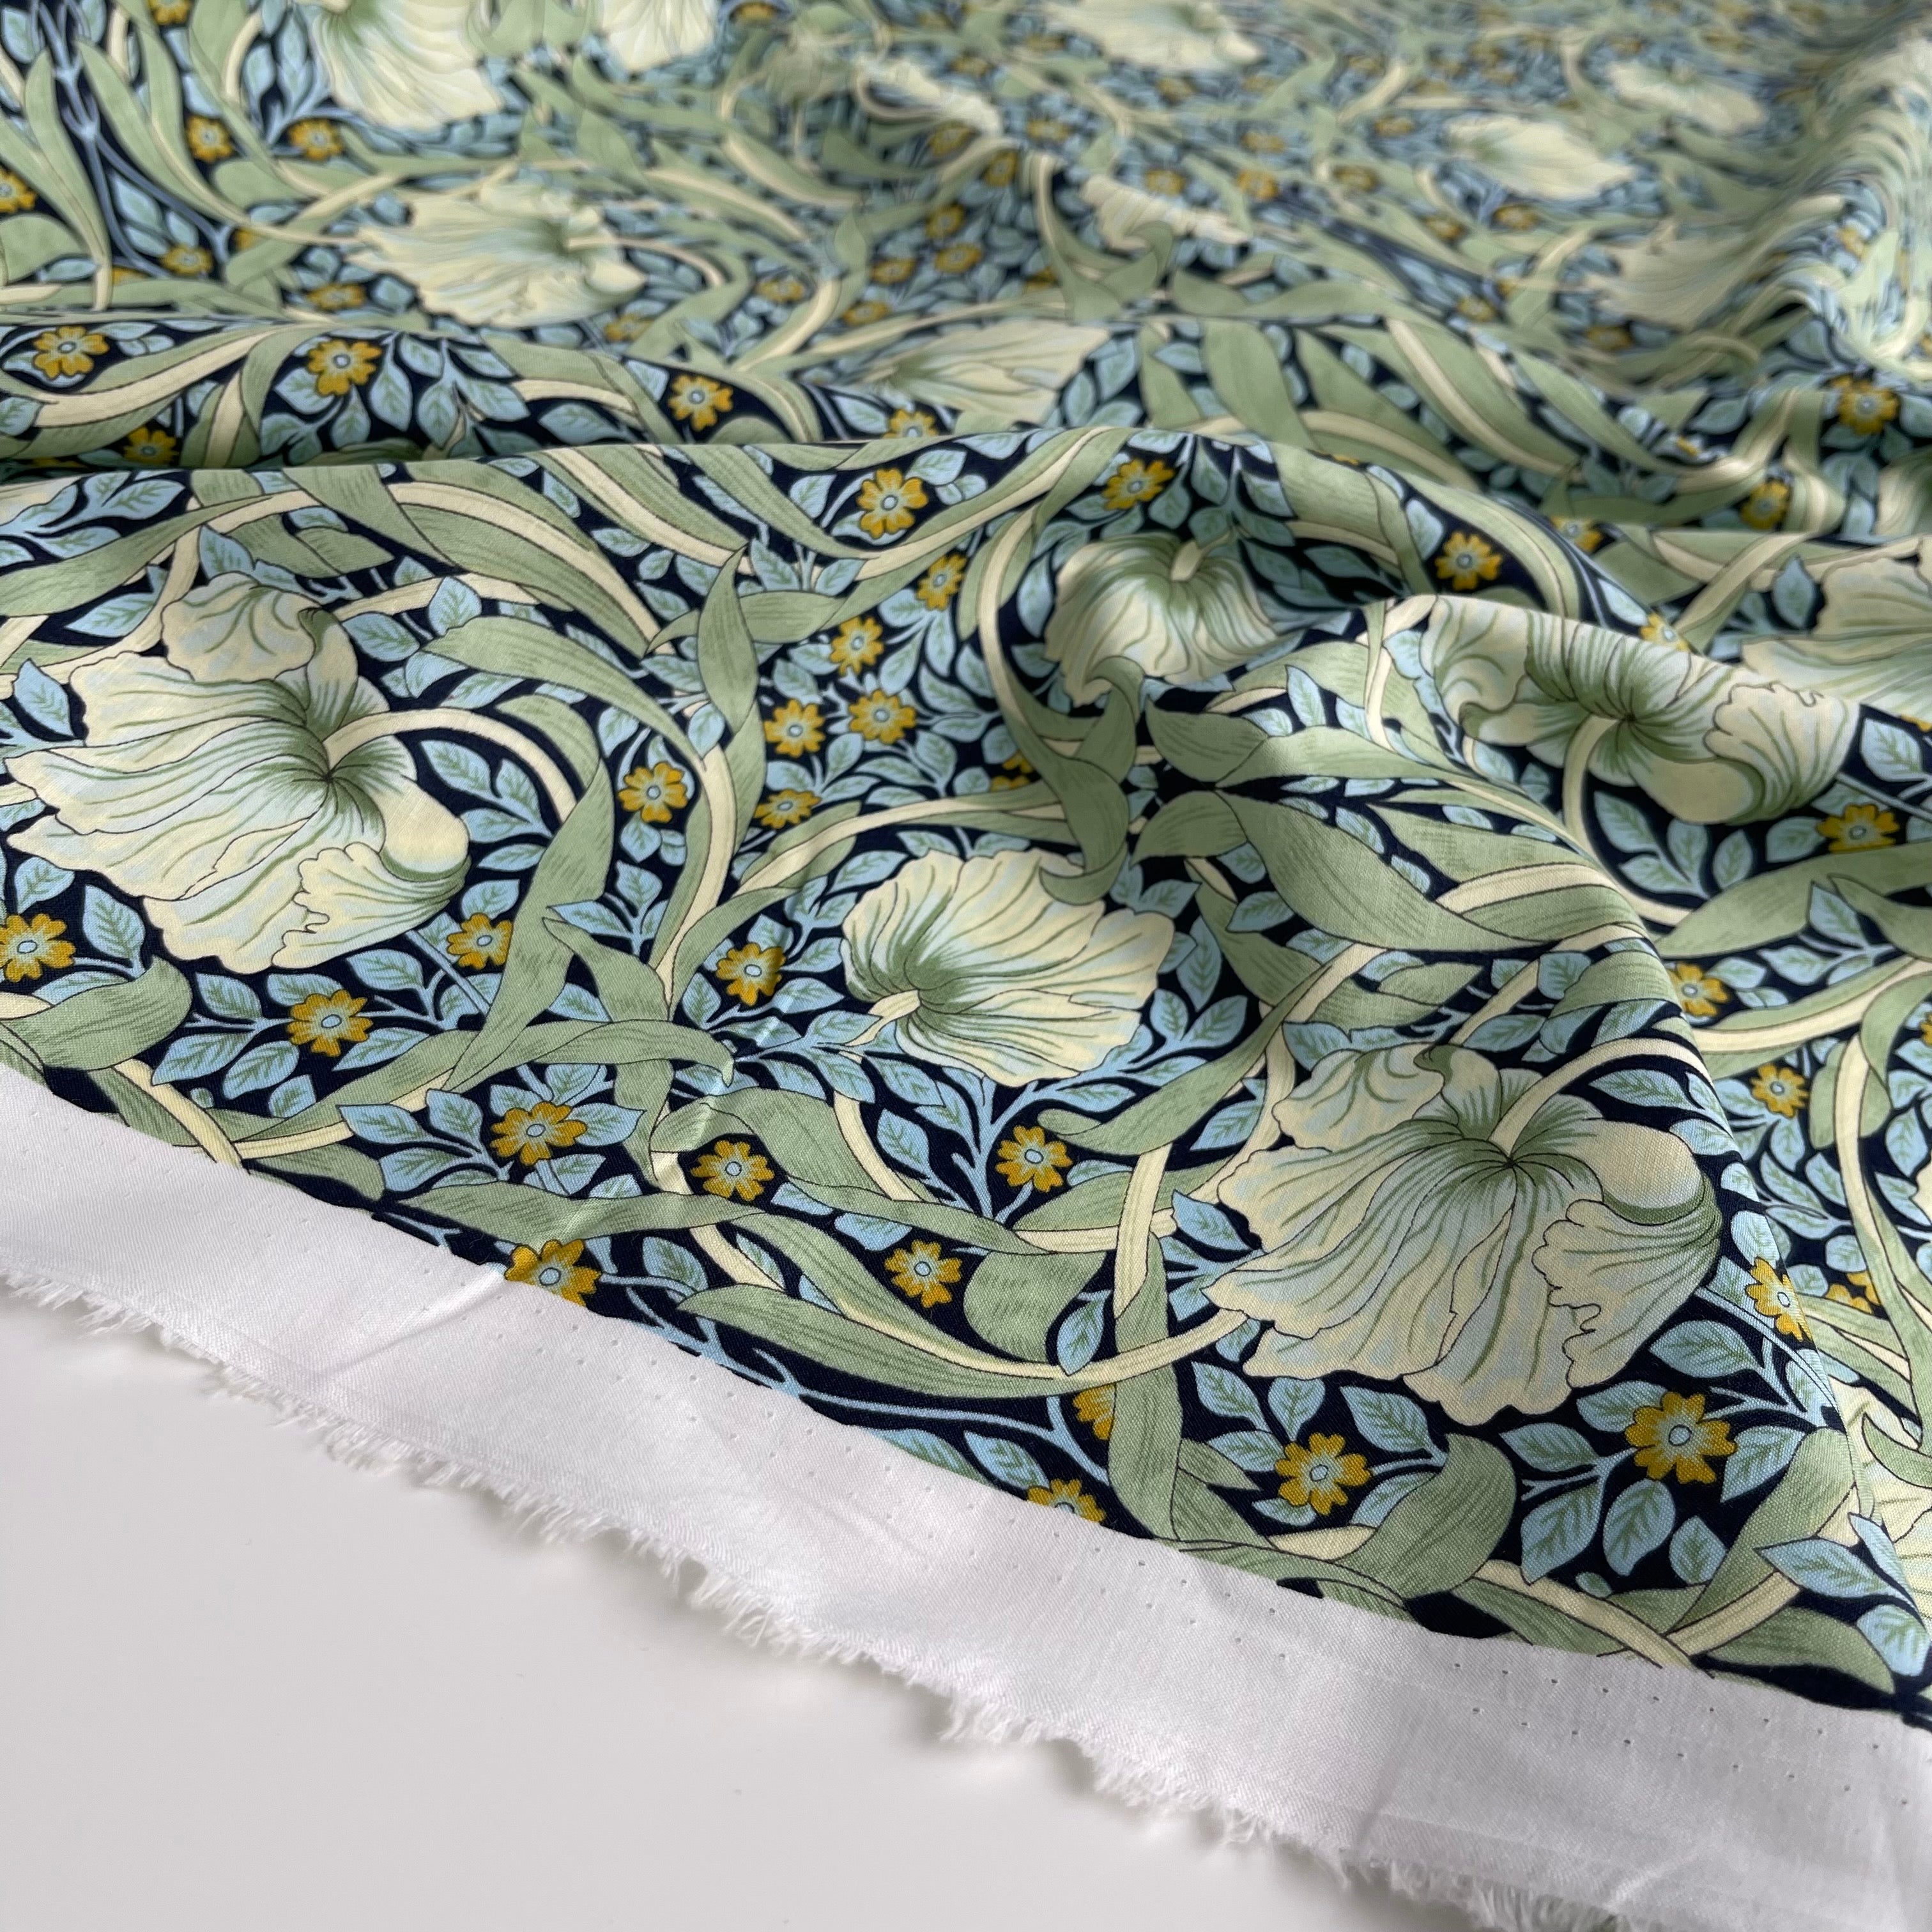 Morris Large Green on Navy Cotton Lawn Fabric